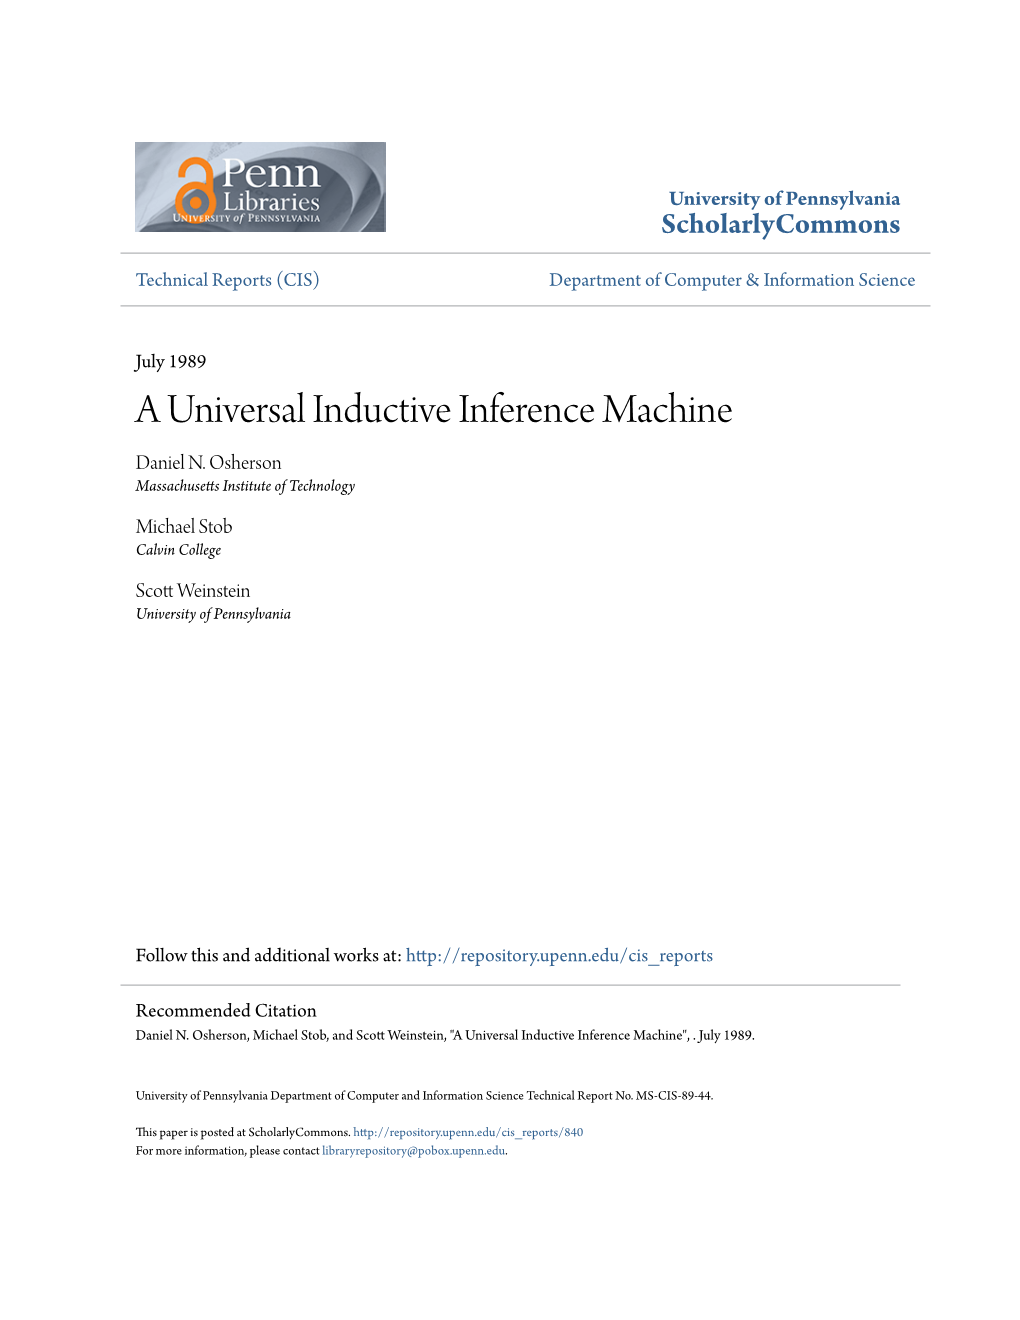 A Universal Inductive Inference Machine Daniel N